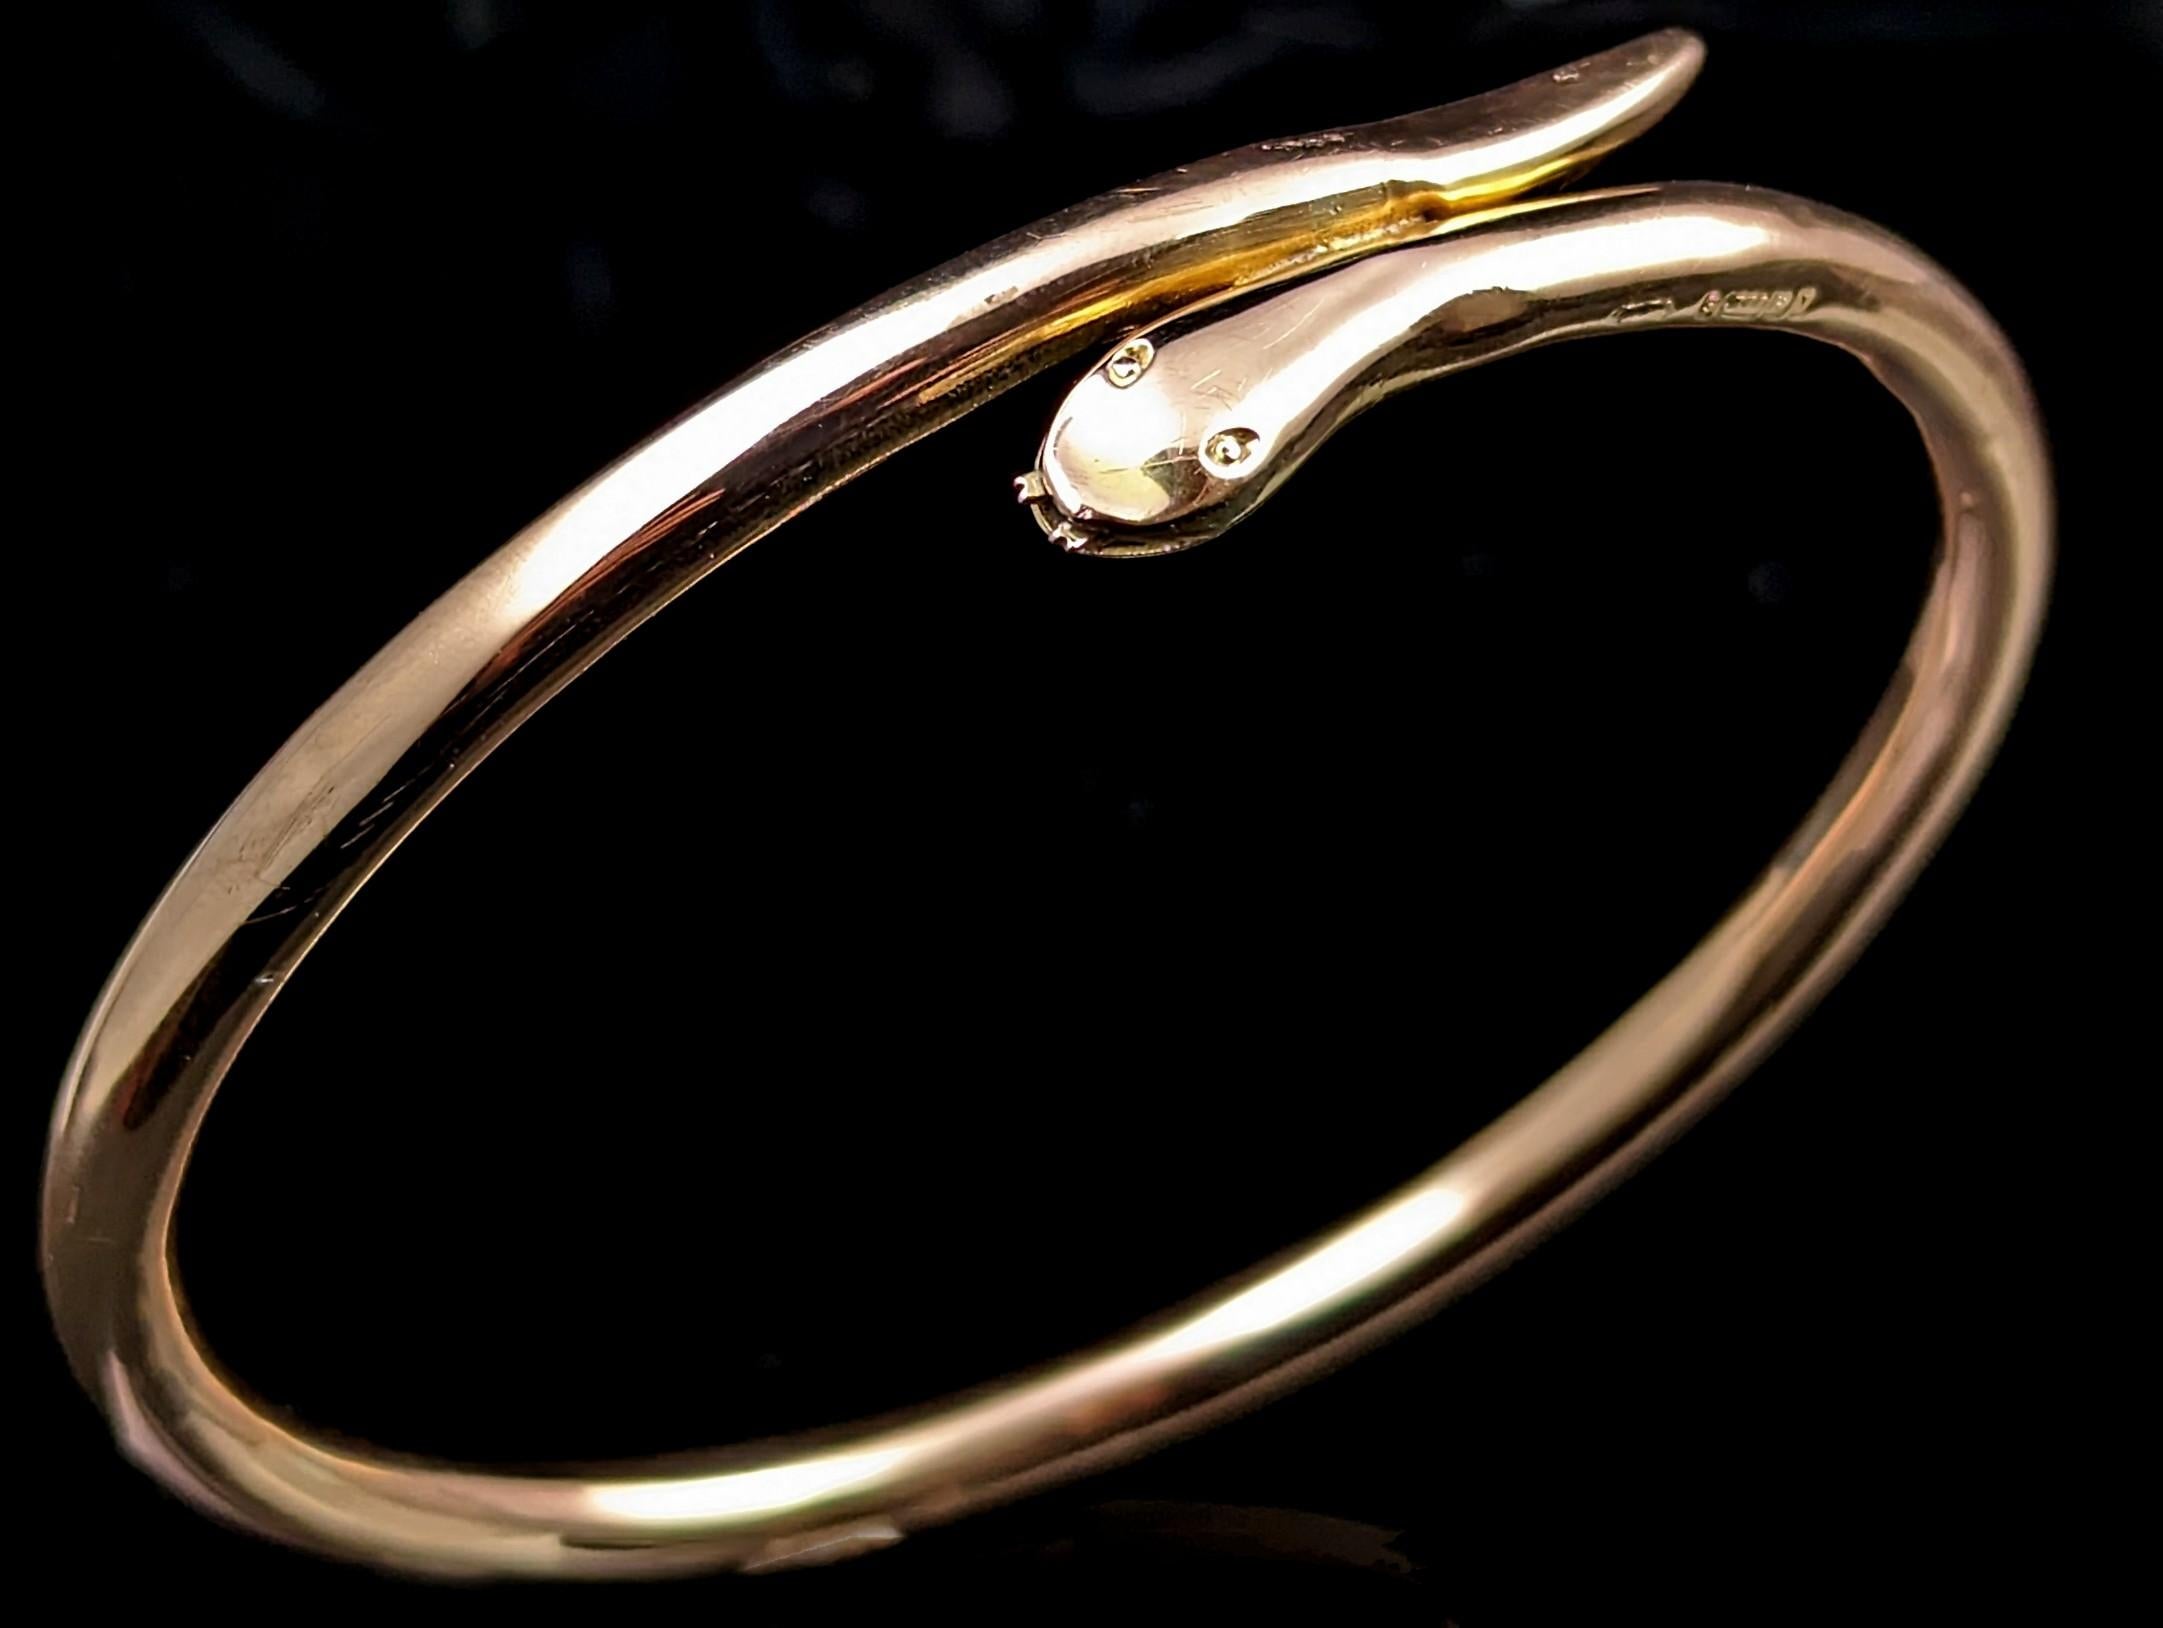 Whoever takes home this amazing antique 9kt gold snake bangle will not be disappointed!

This spectacular piece is an upper arm bangle, designed to be worn higher up on the arm and made at the height of the Art Deco Egyptian revival period and this